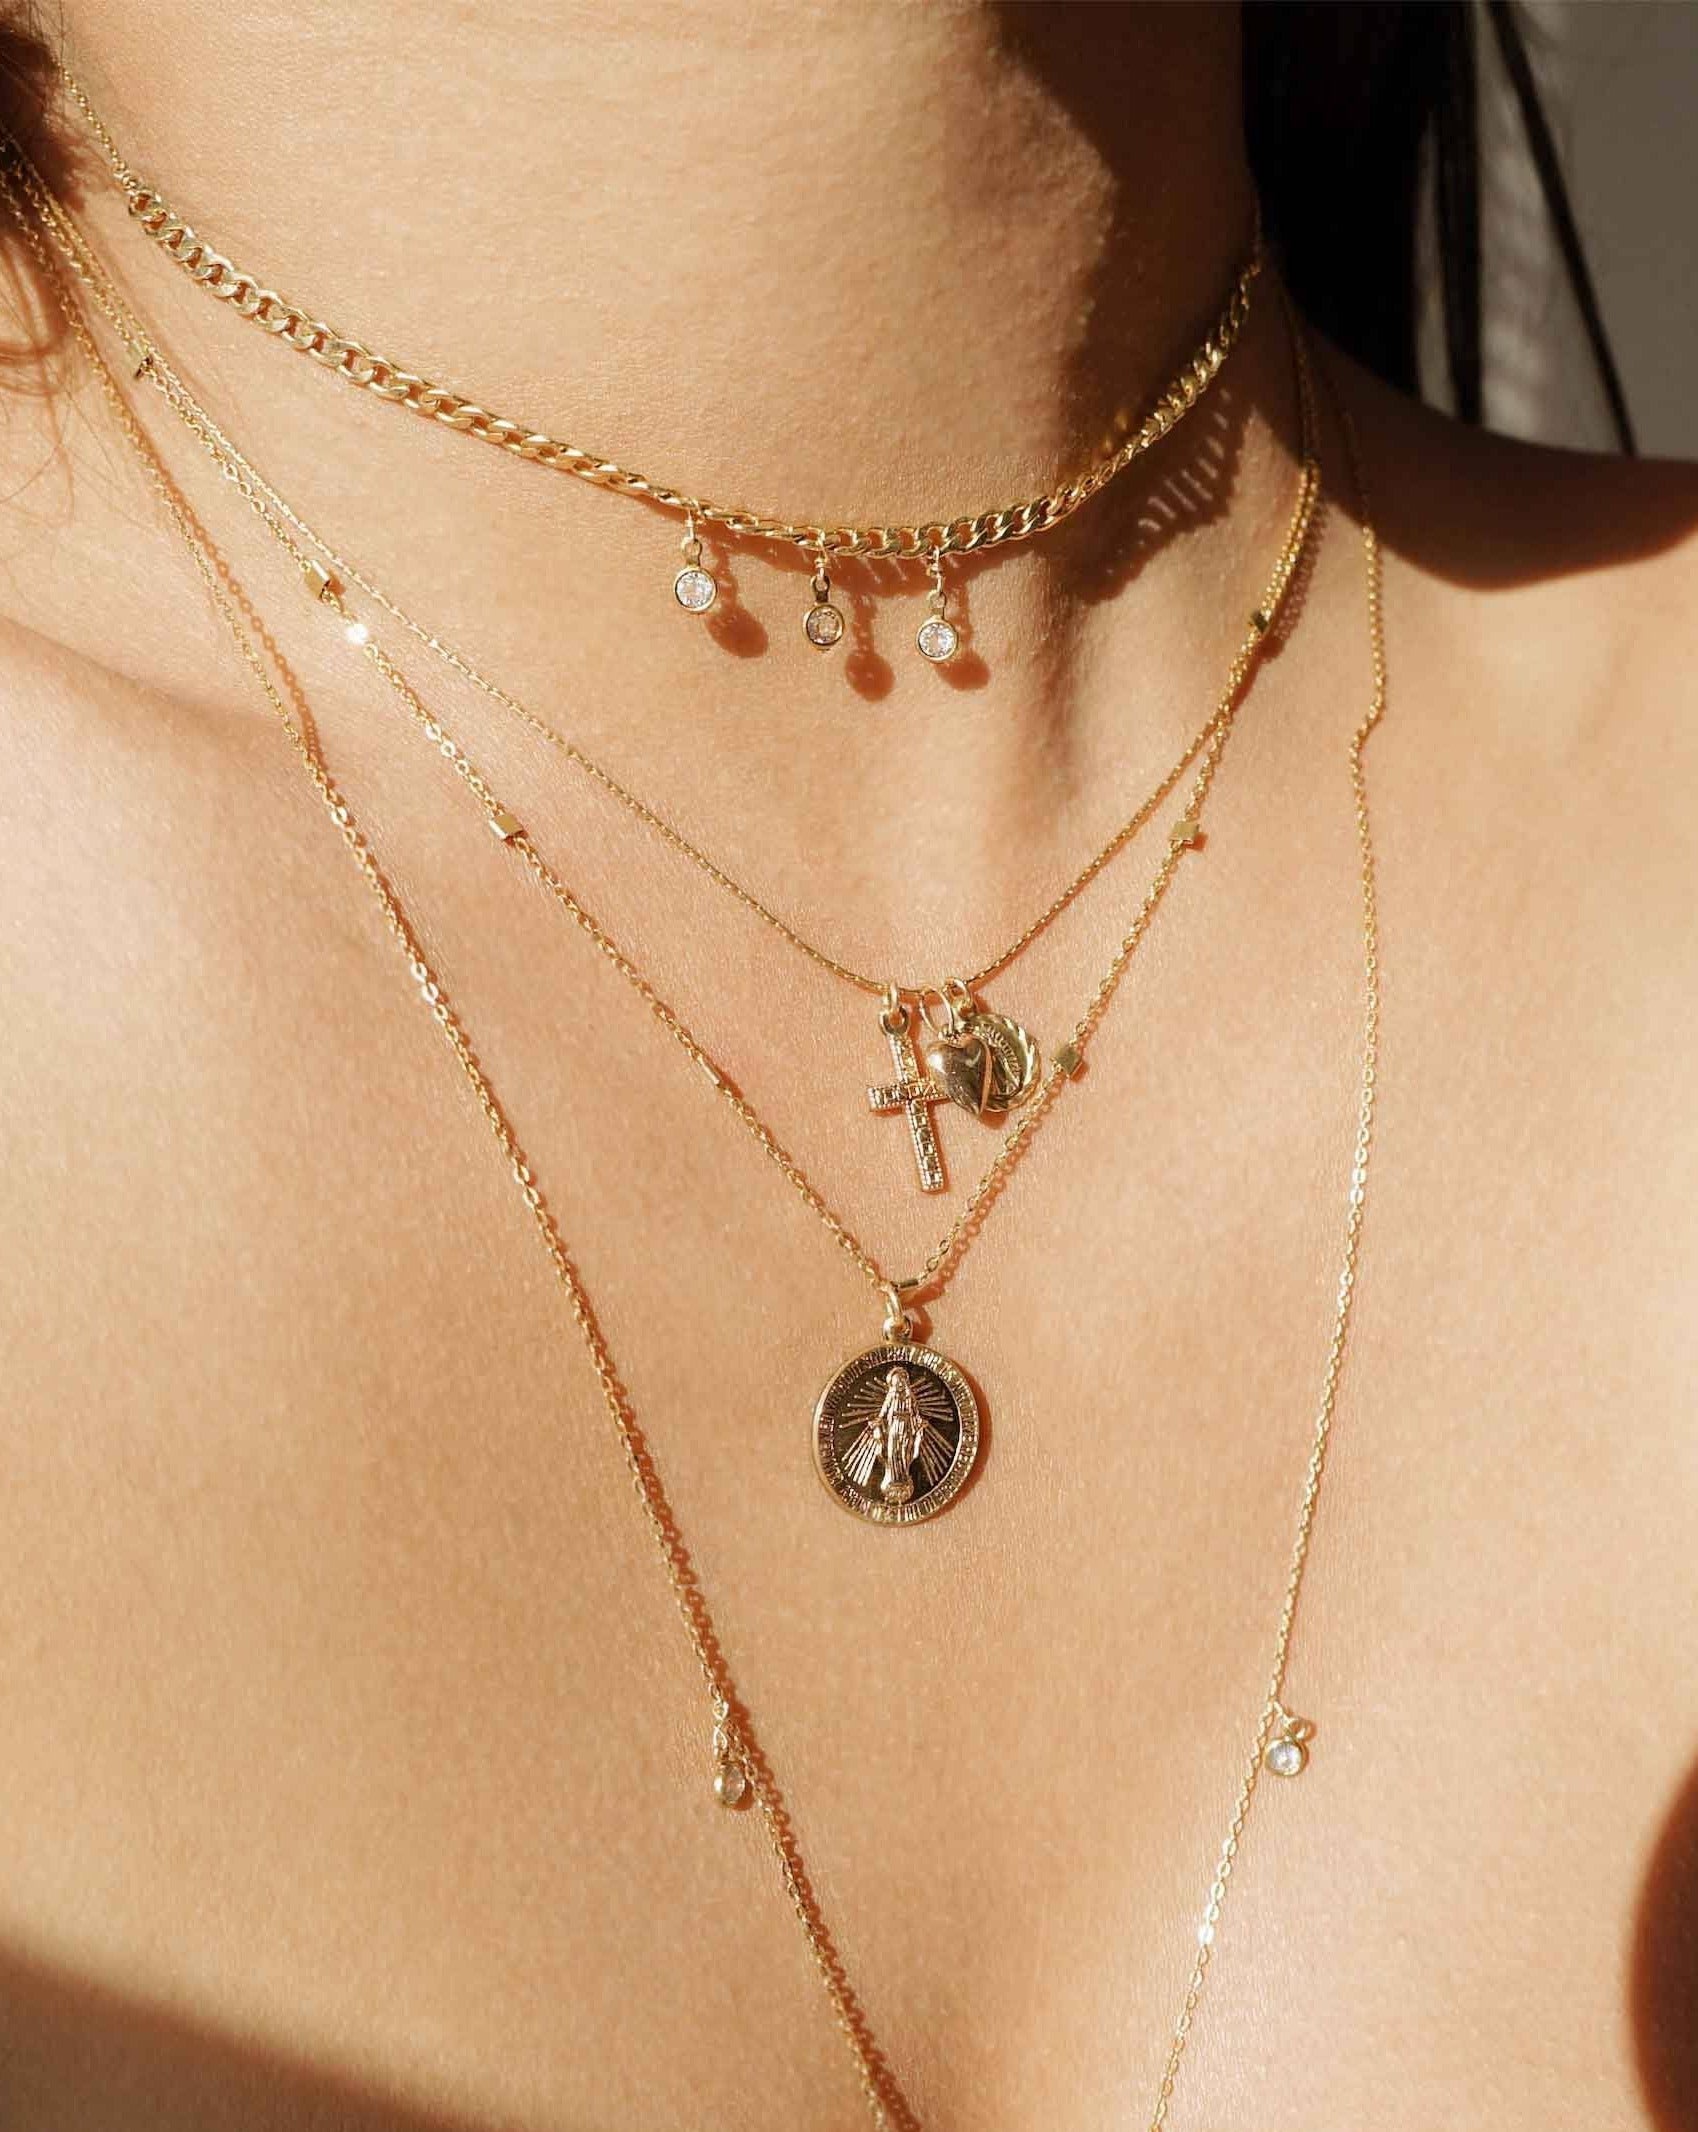 Domingo Necklace by KOZAKH. A 16 to 18 inch adjustable length necklace in 14K Gold Filled, featuring a Saint Christopher medallion, a 6mm Heart charm, and a Filigree decorated cross.